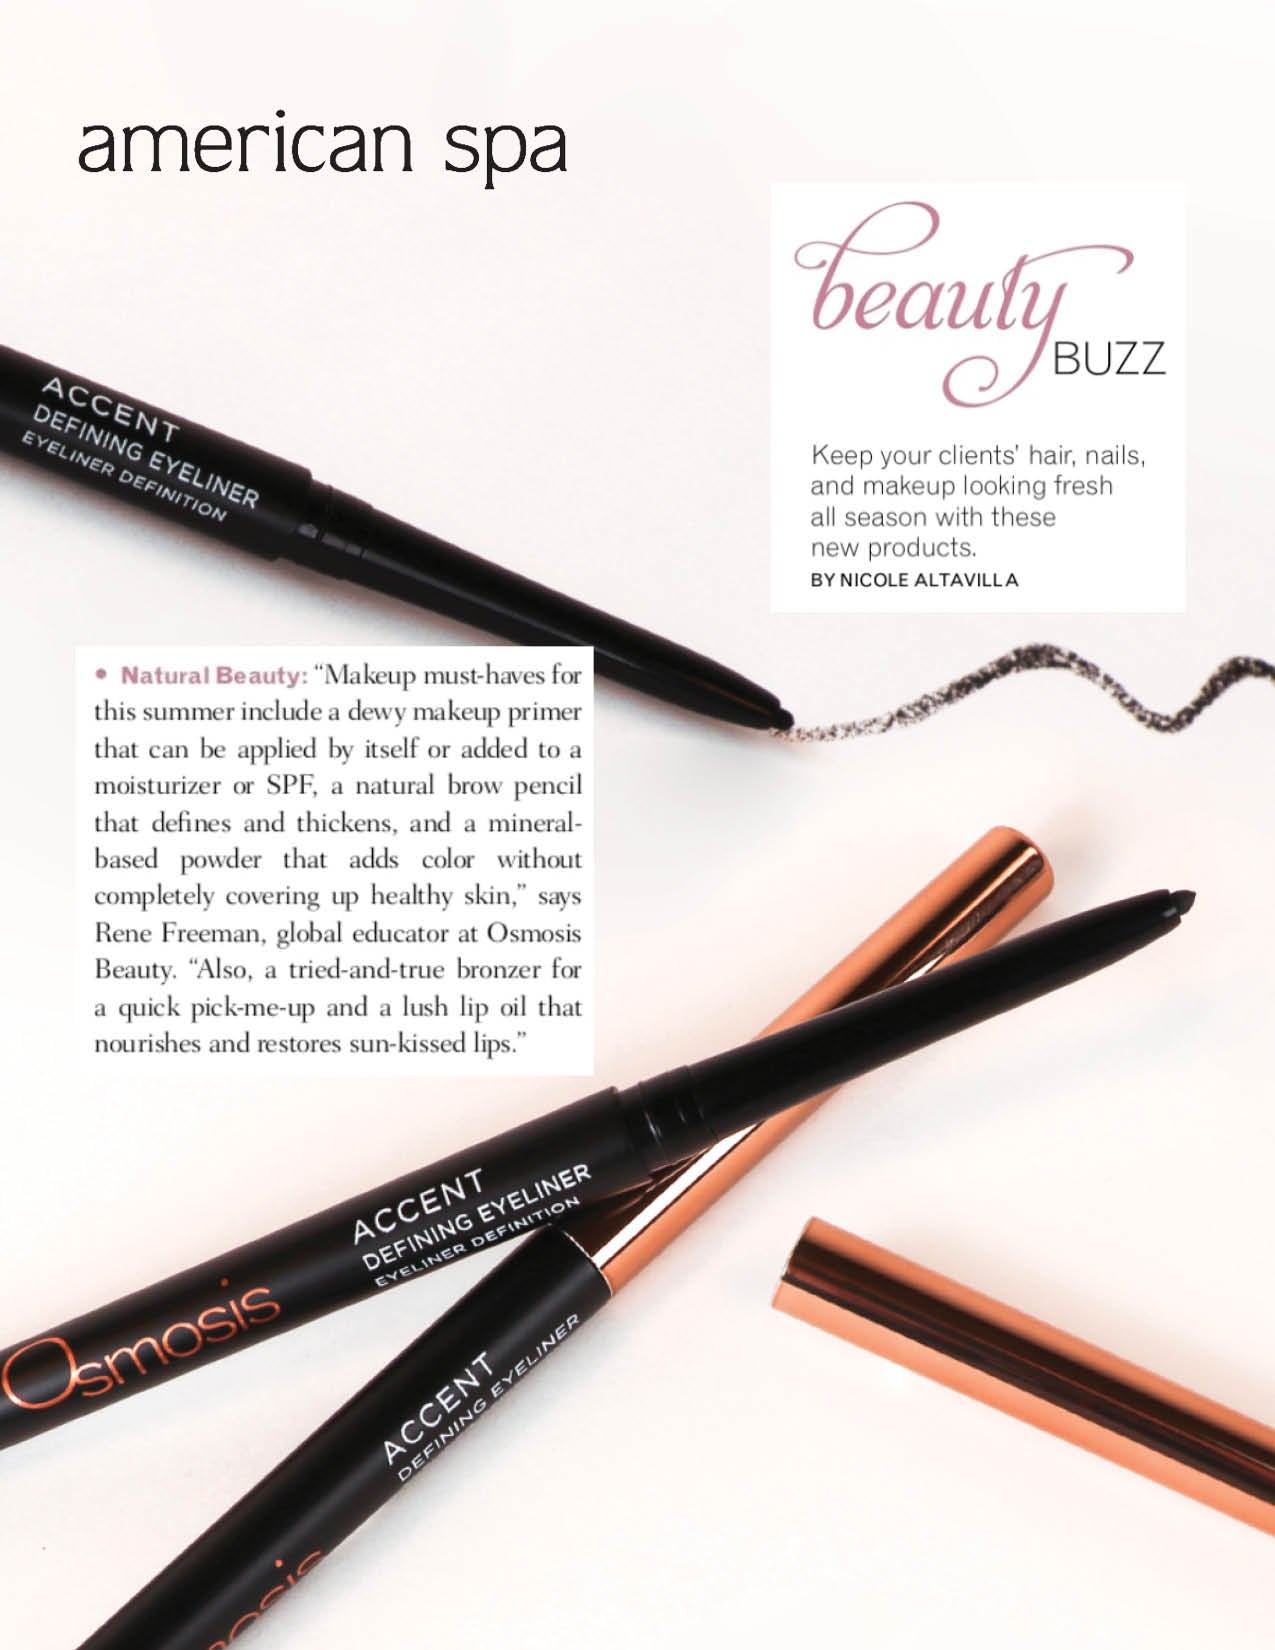 The Accent Defining Eyeliner was featured in the Beauty Buzz section of American Spa Magazine May/June issue